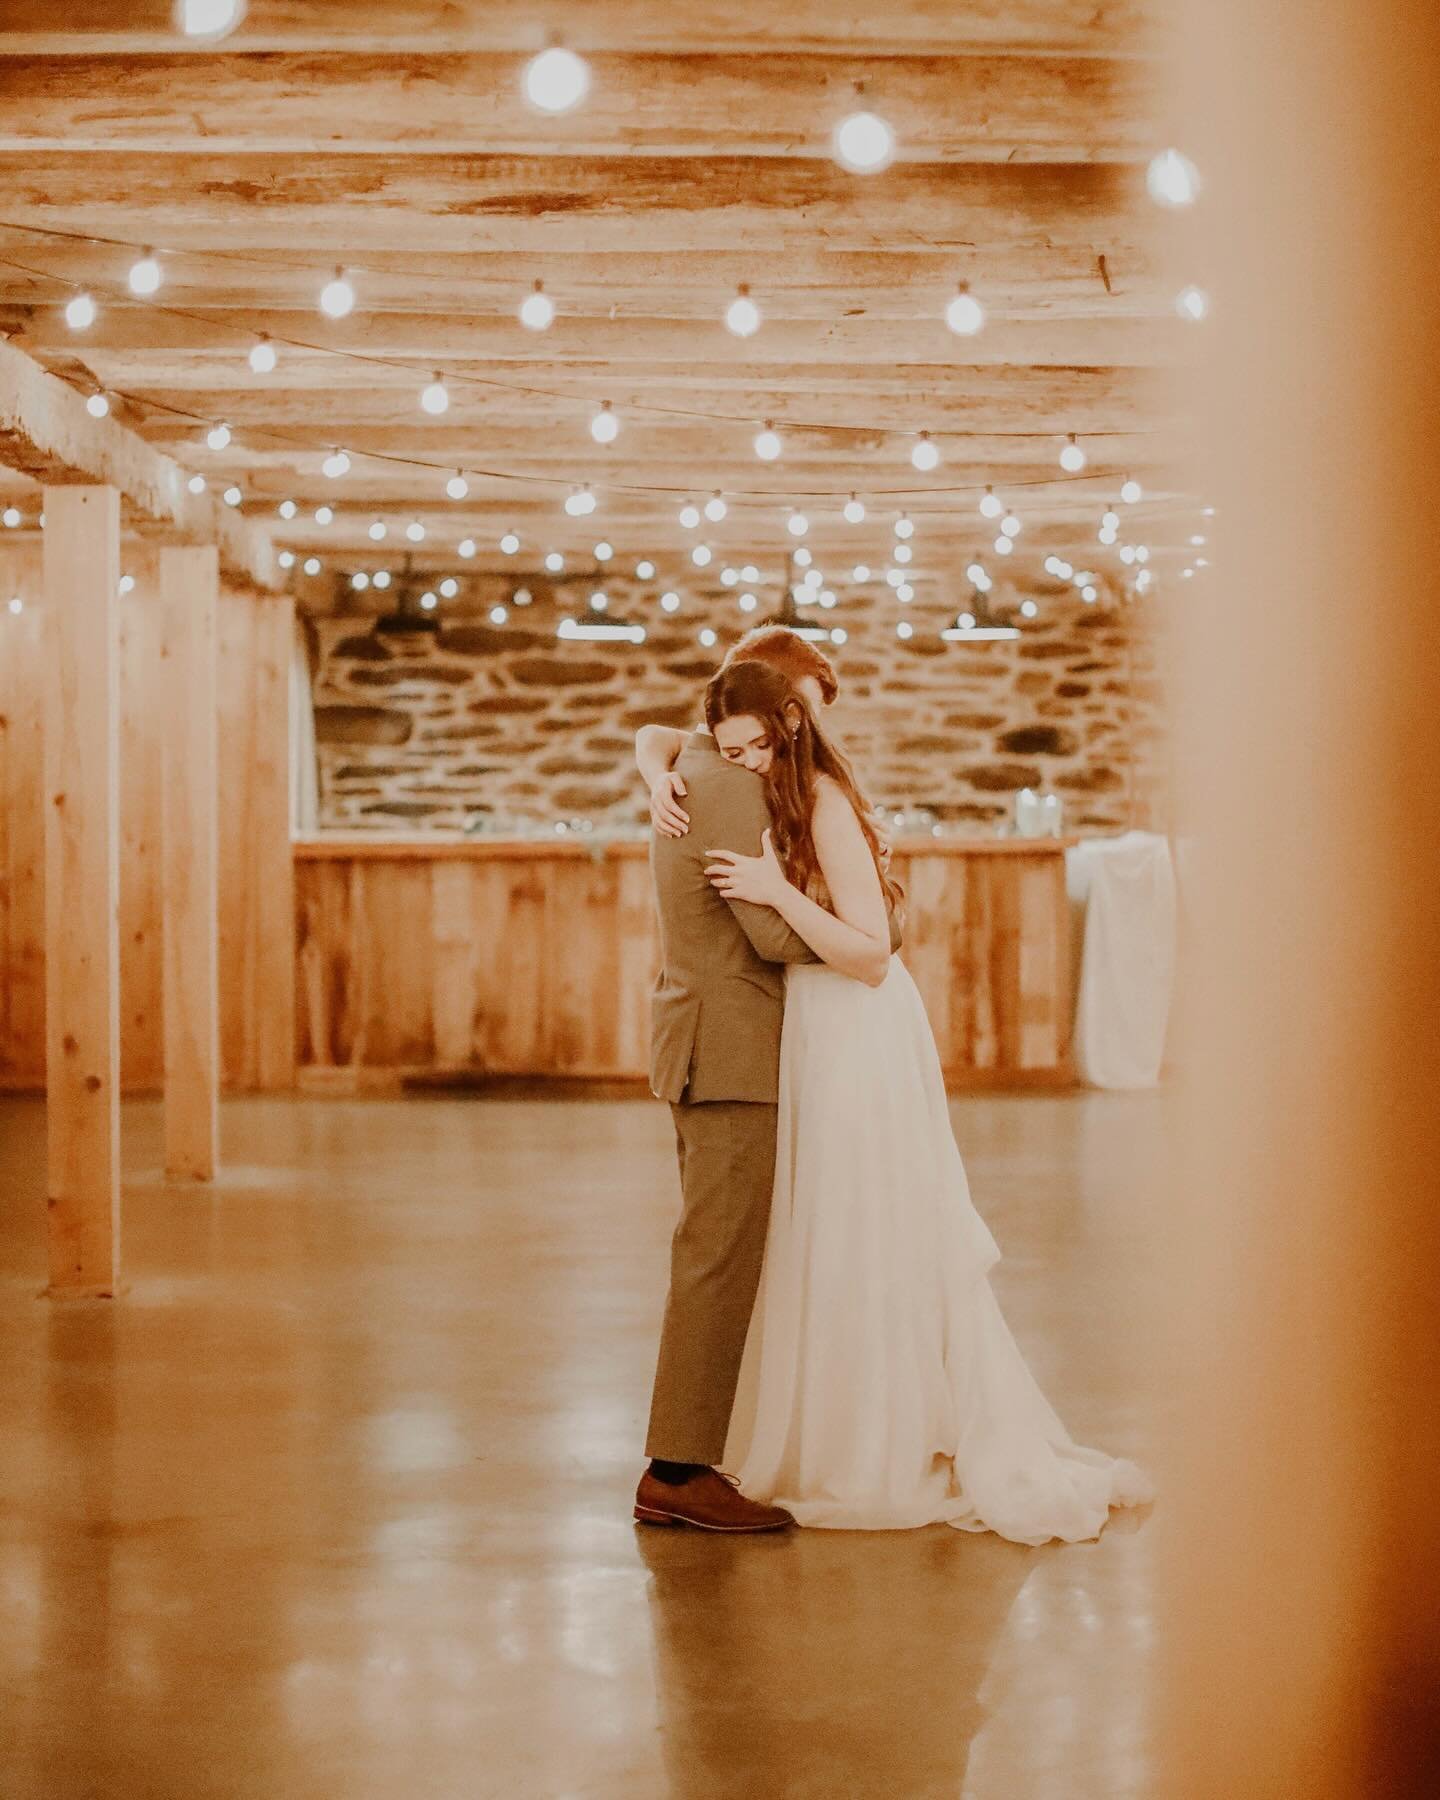 Scenes from Kaylee and Jared&rsquo;s private last dance 🥰 I love how @bellflowerdesignco makes it look like she&rsquo;s just peeking into their dance, so we can get a glimpse of those sweet moments they&rsquo;re sharing after a beautiful wedding day